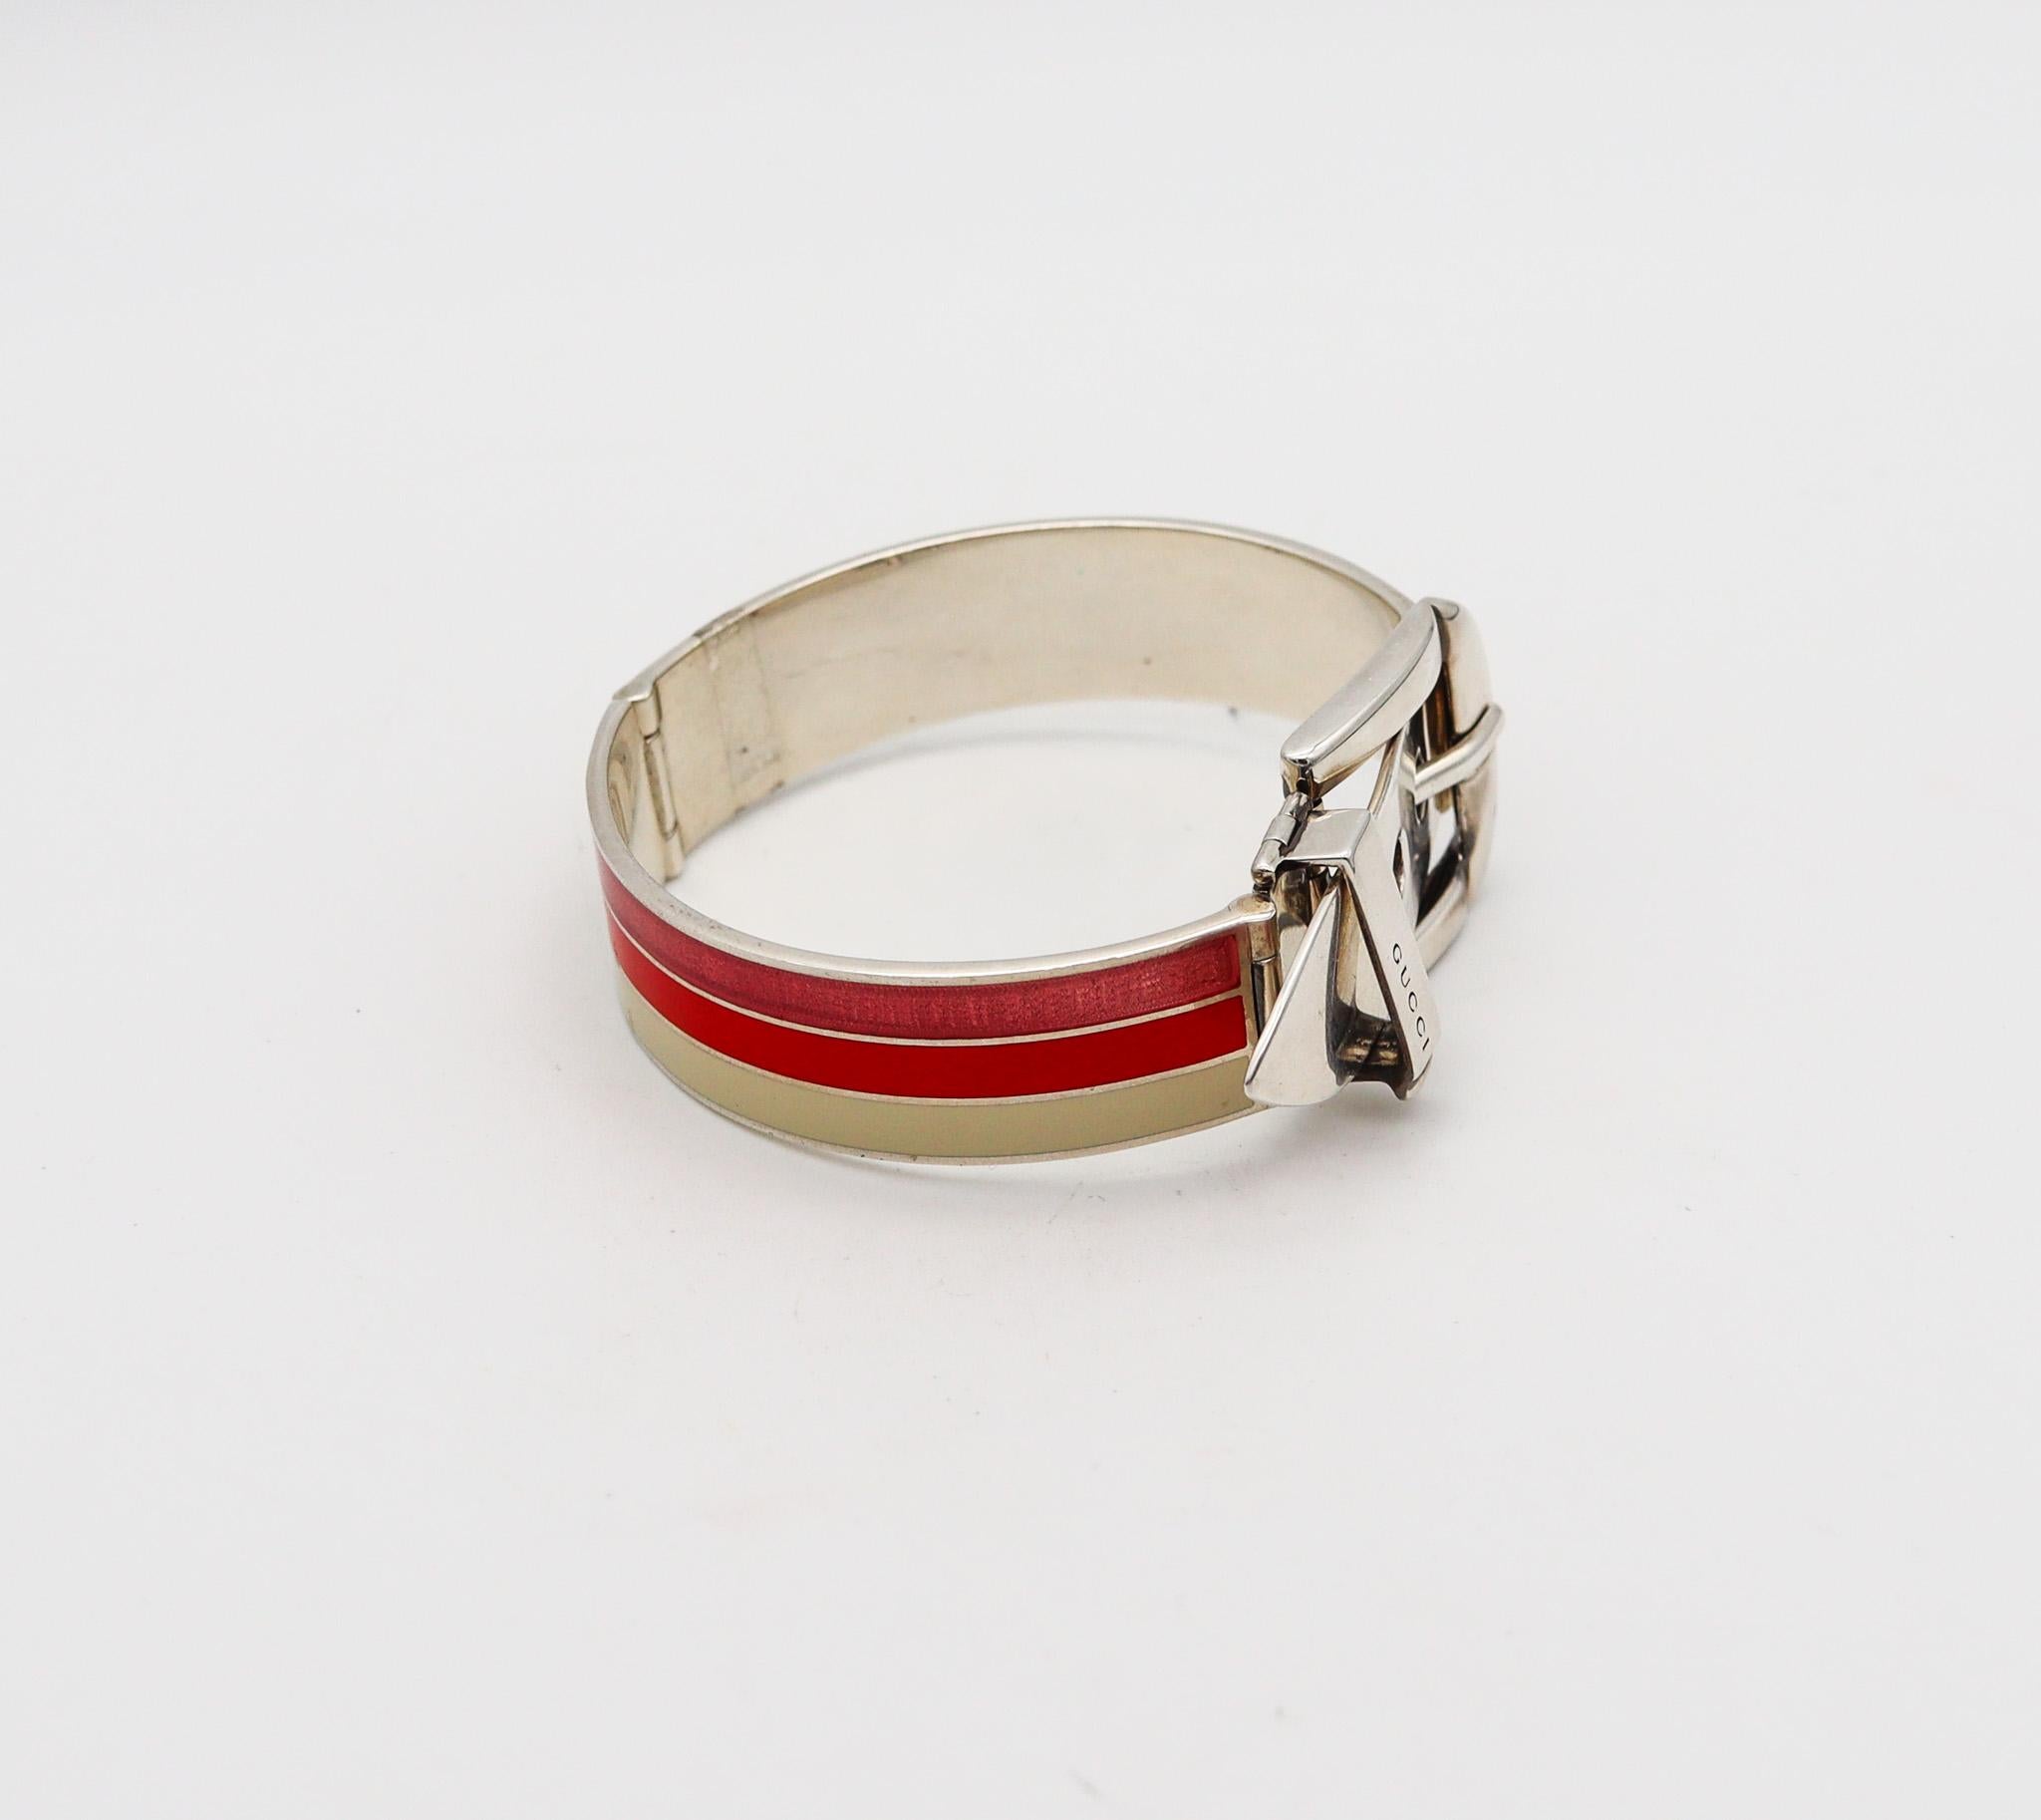 Gucci 1980 Buckle Bracelet In .925 Sterling Silver With Pink And White Enamel In Excellent Condition For Sale In Miami, FL